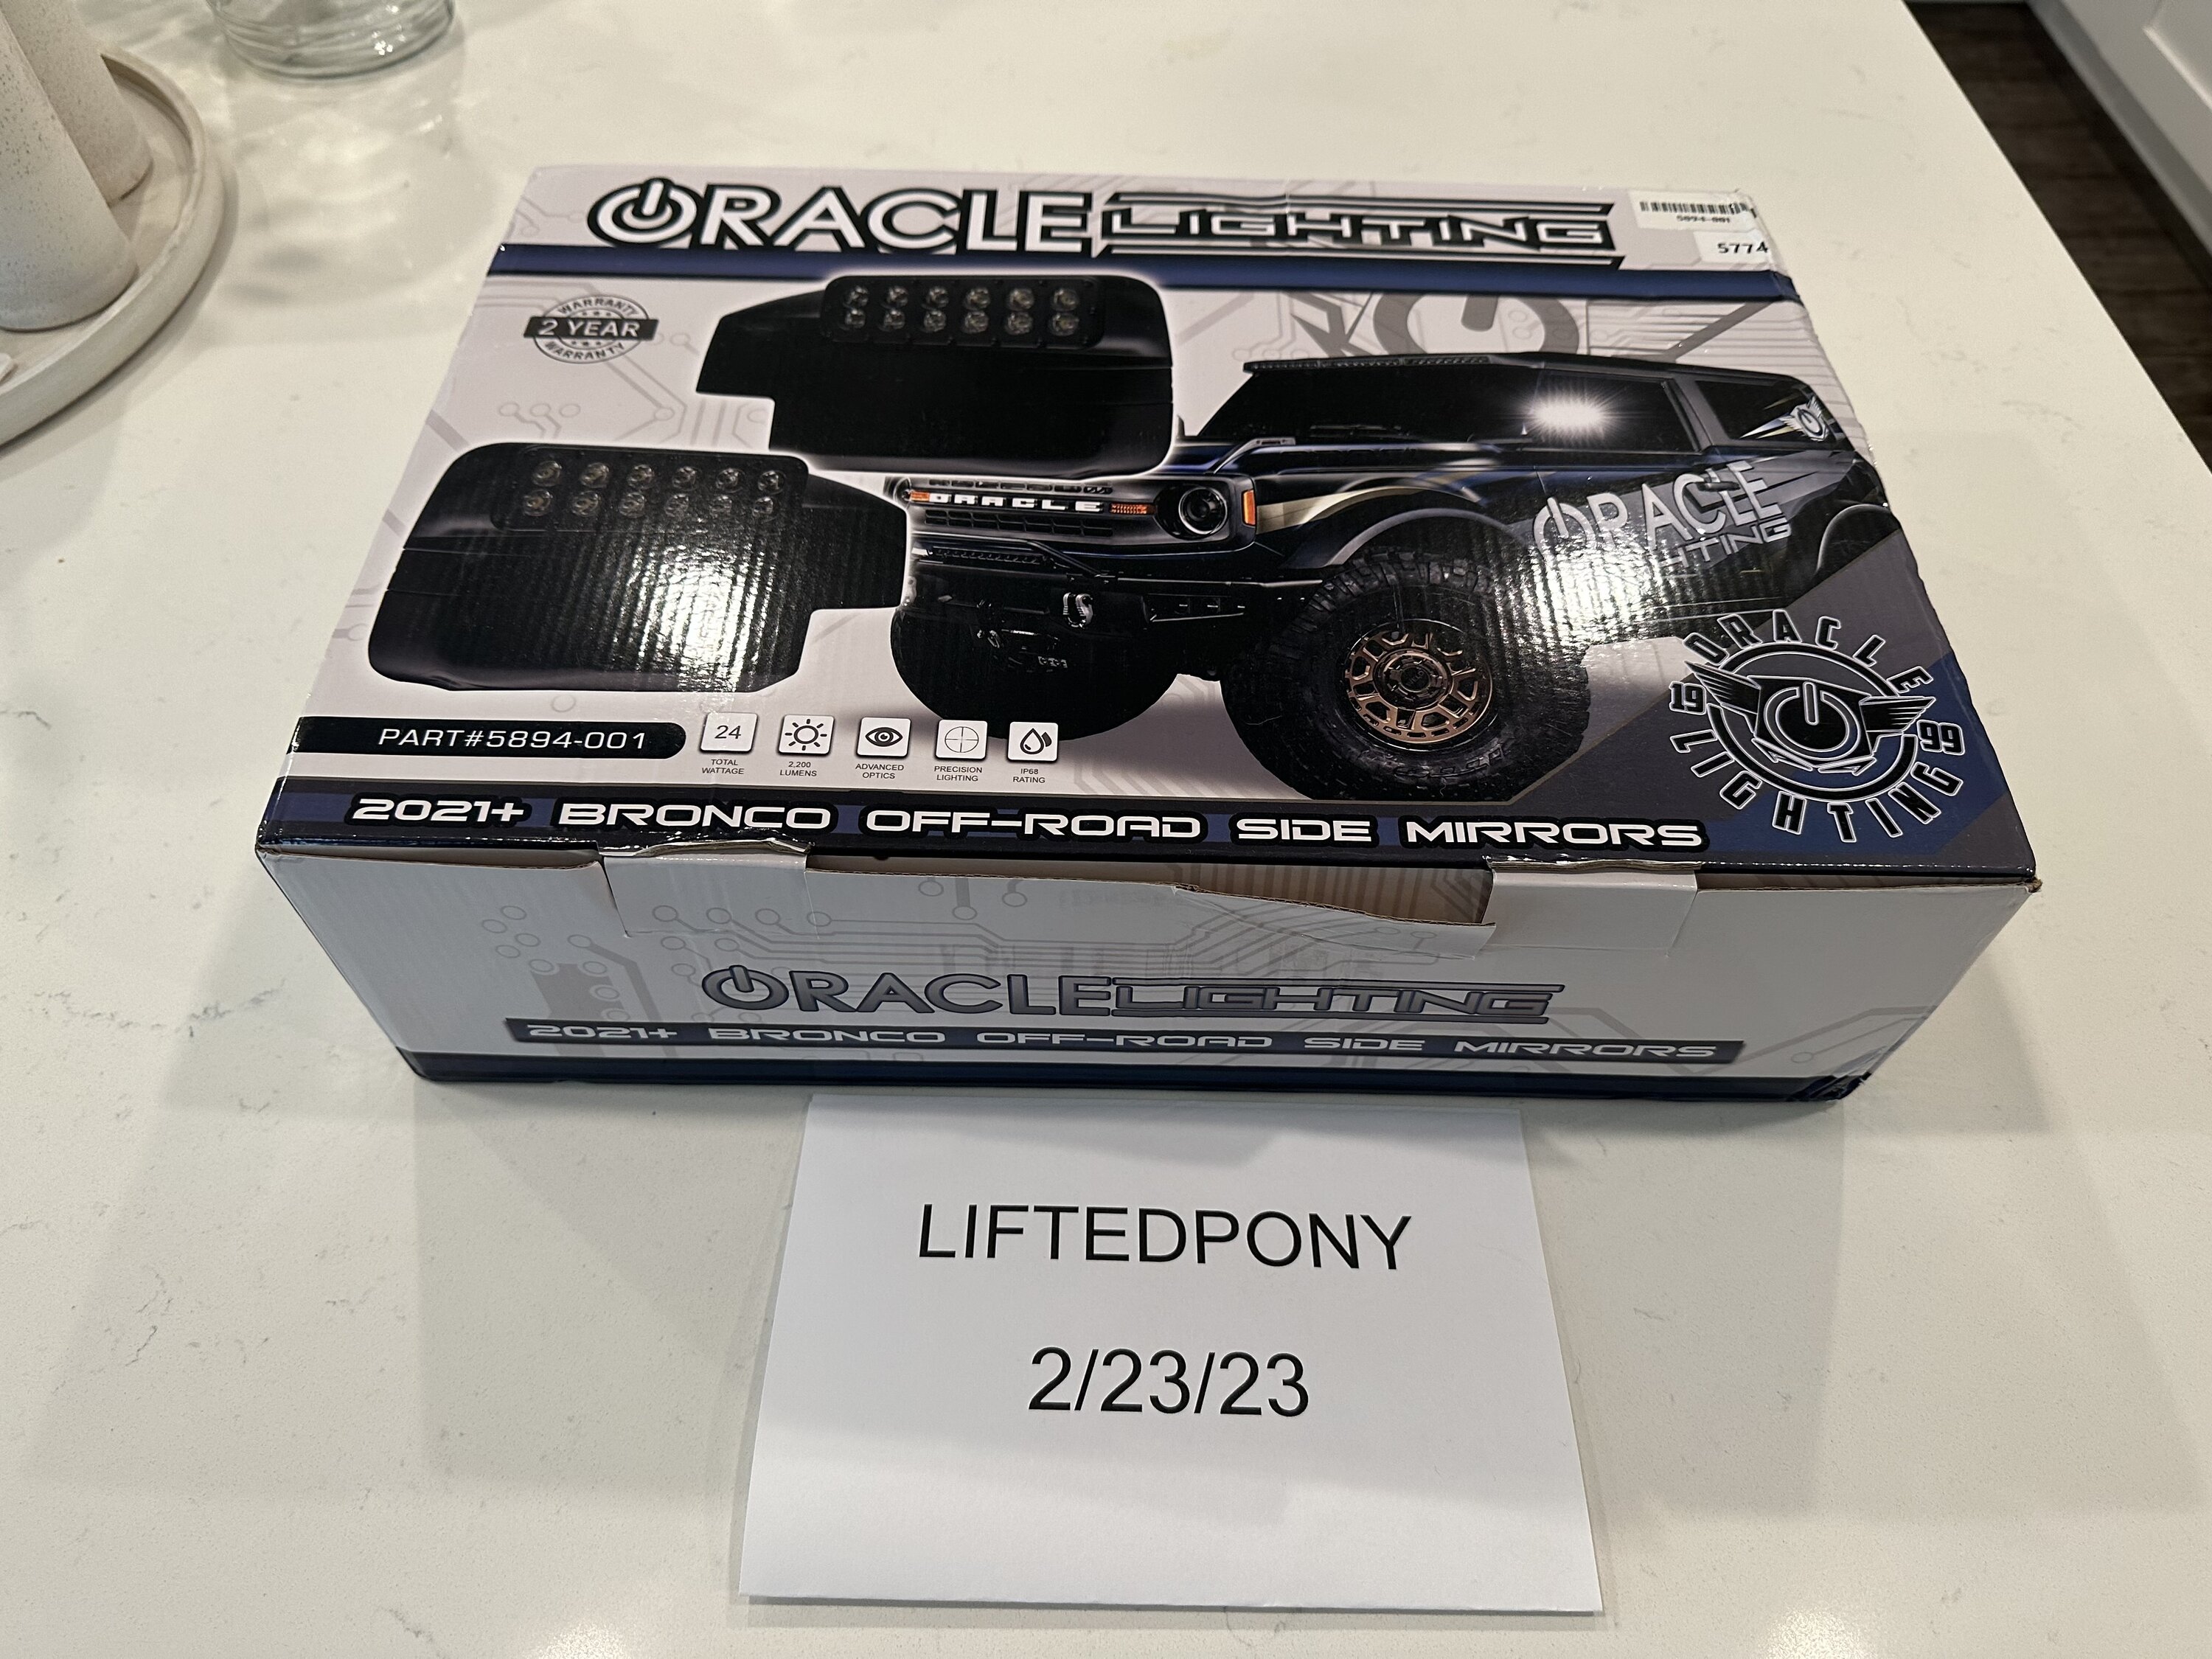 Ford Bronco FS - ORACLE Bronco Side Mirrors w/ Integrated LED Ditch Lights - $375 Shipped IMG_9604